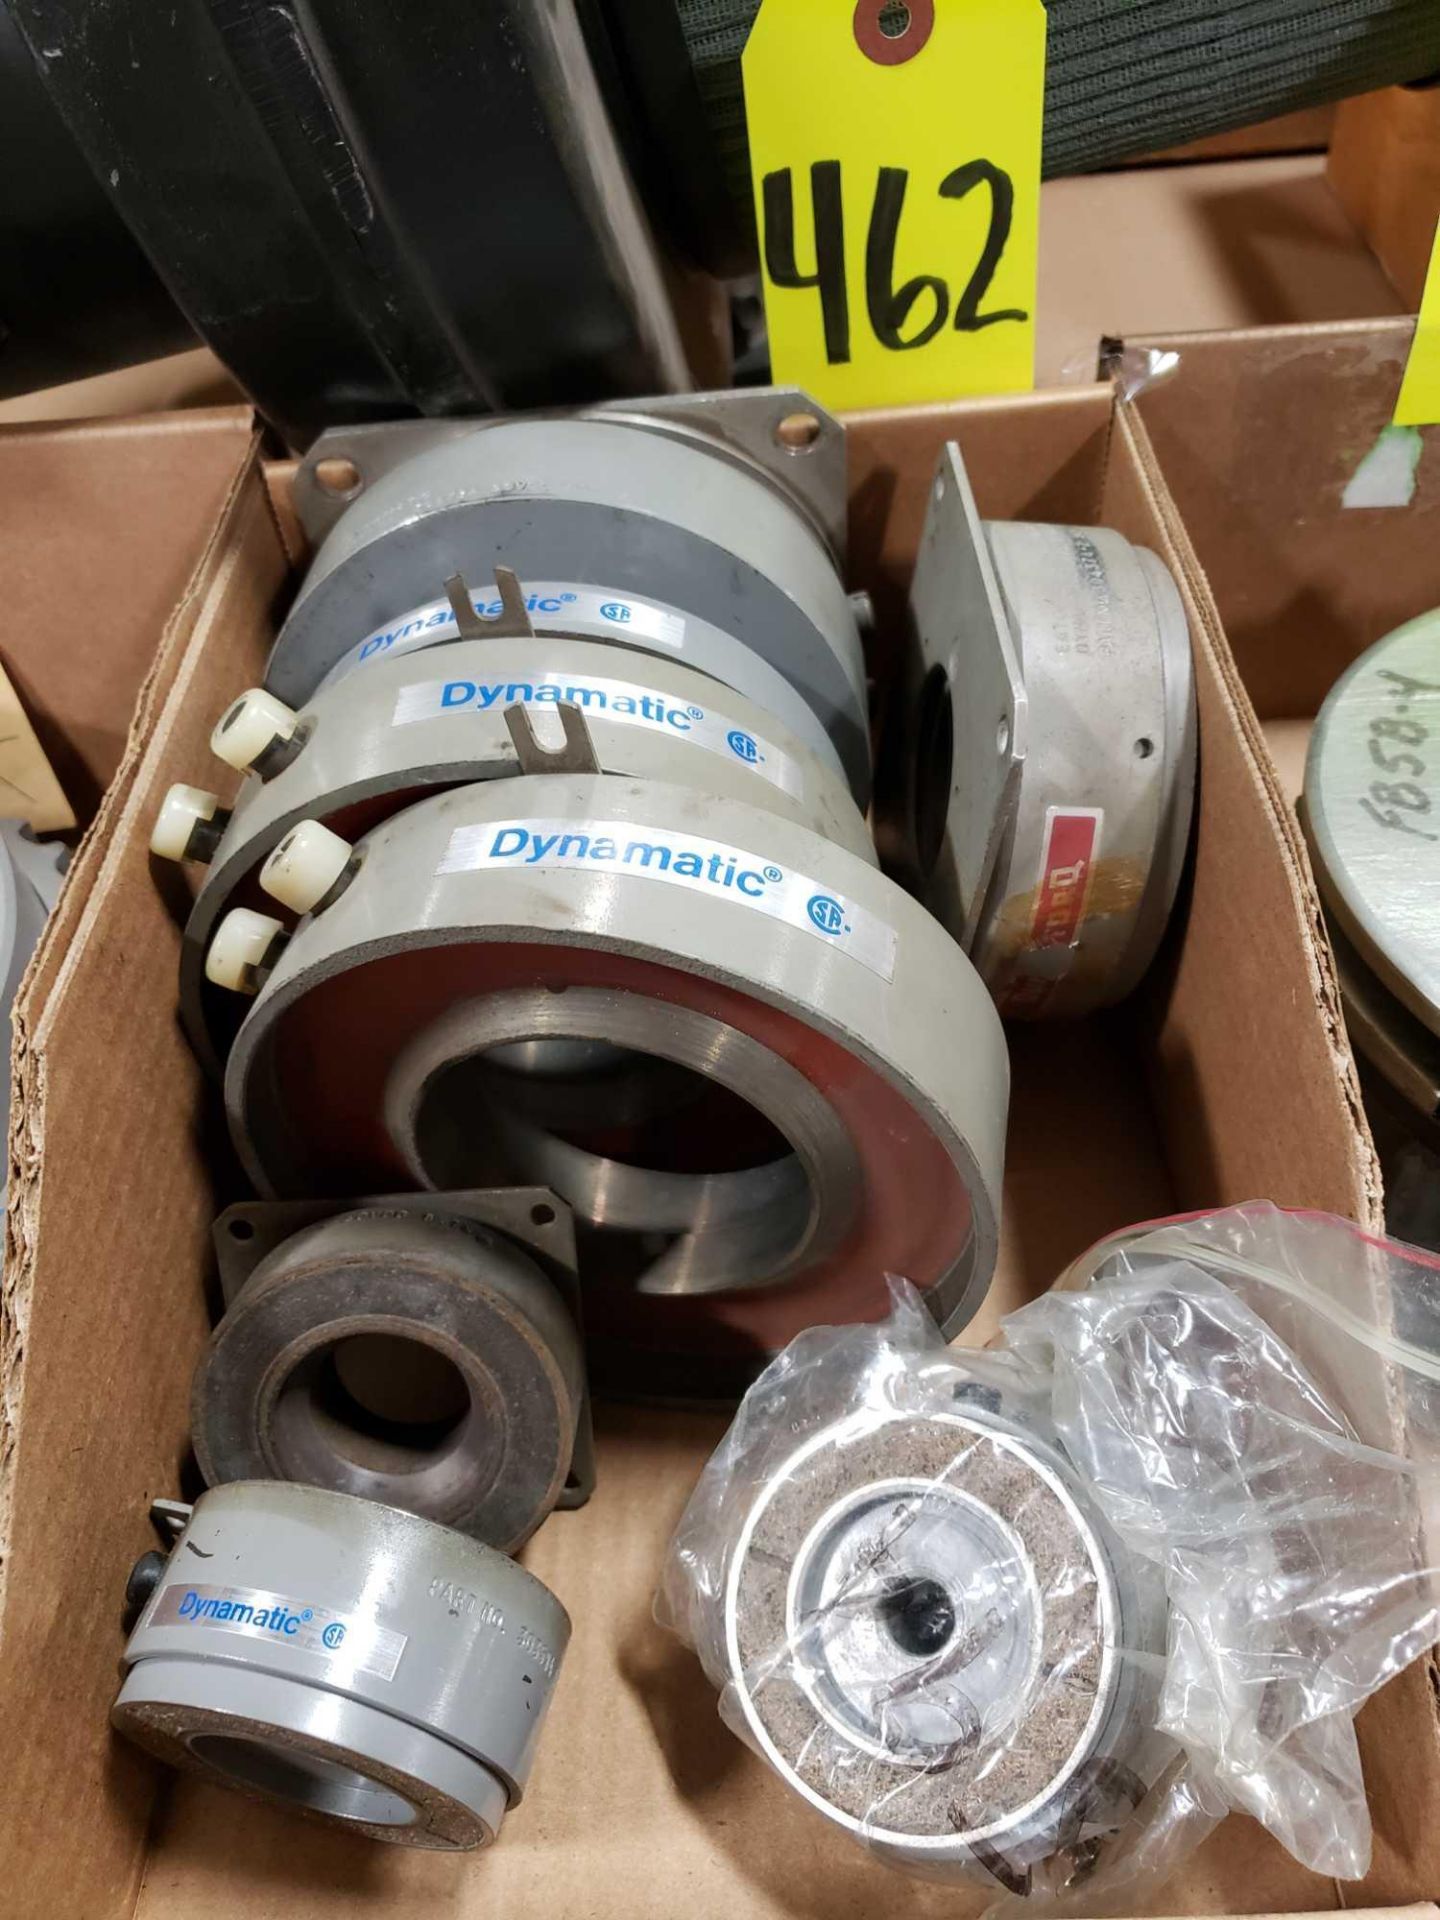 Assorted Eaton Dynamatic parts new as pictured.